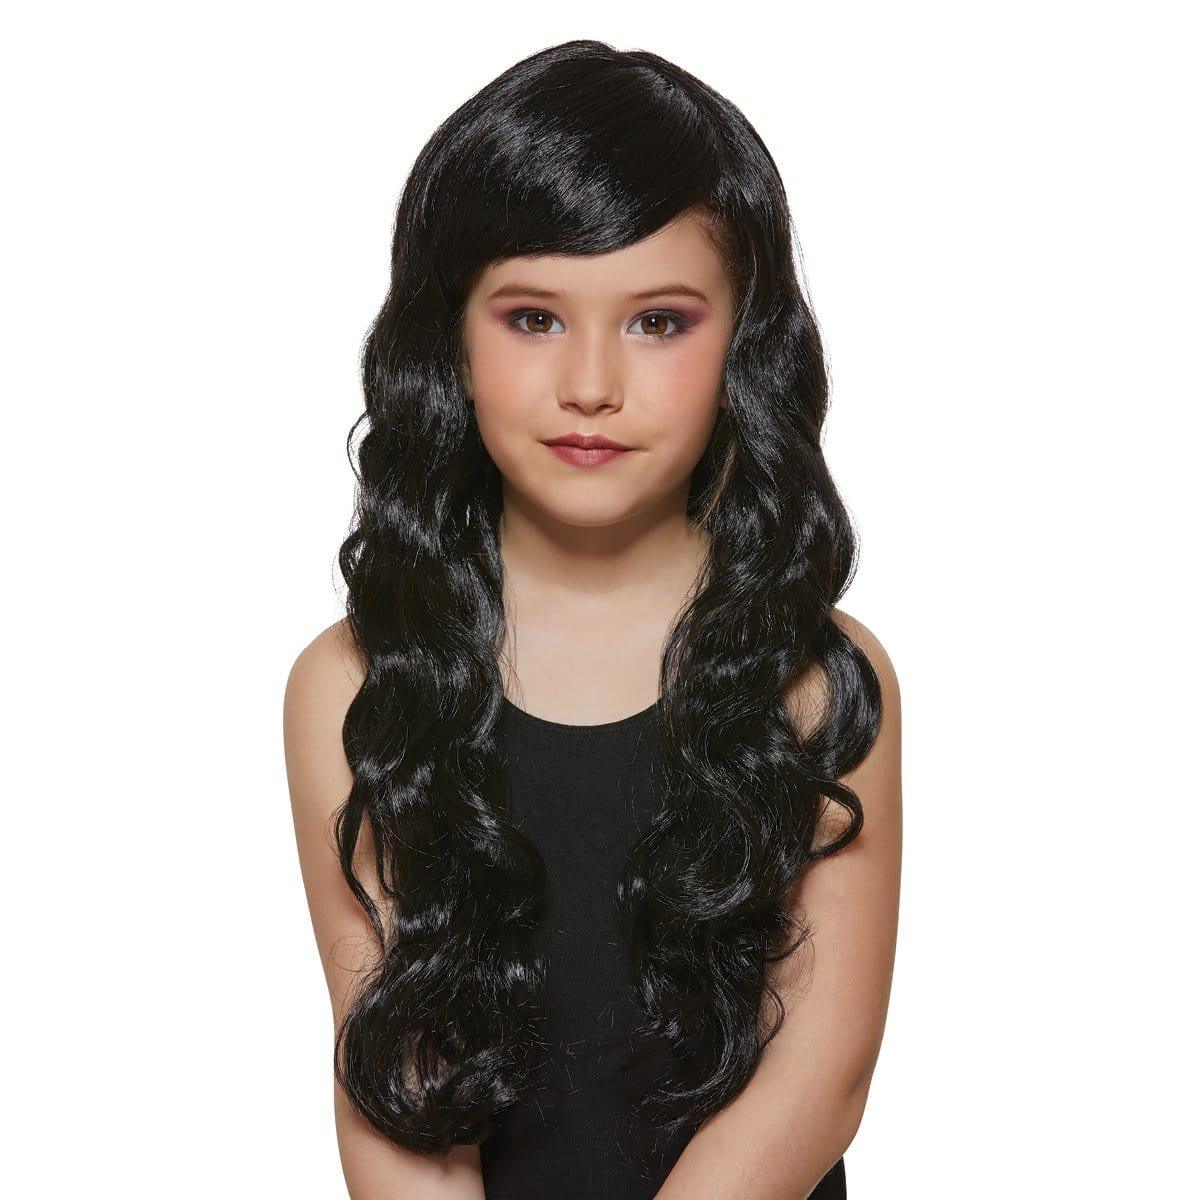 Buy Costume Accessories Black Petite Diva wig for girls sold at Party Expert